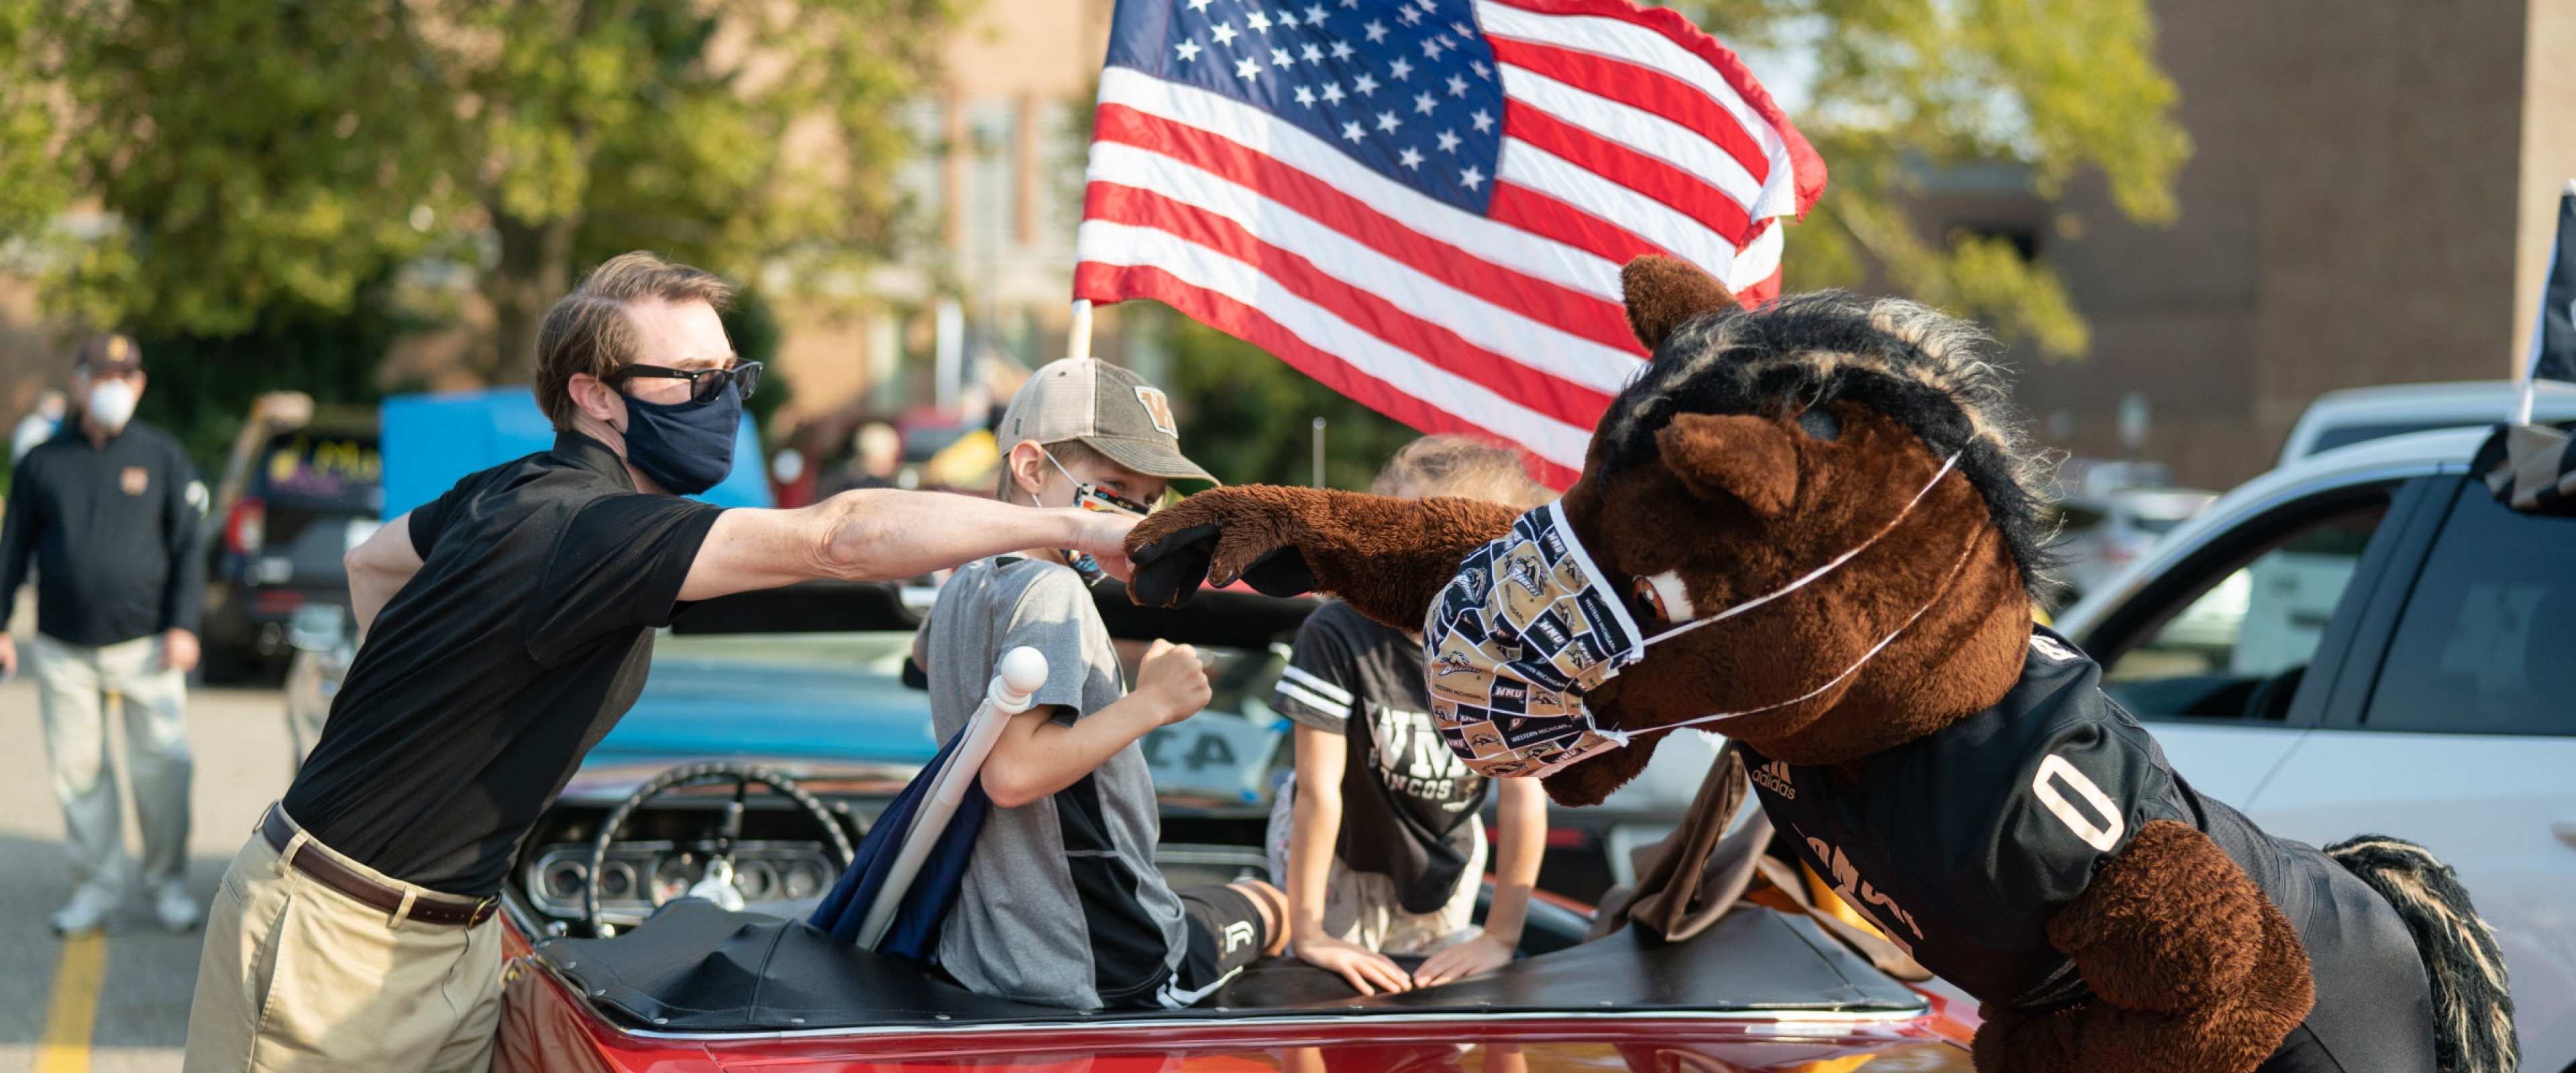 Buster Bronco bumps the fist of a man during the parade.